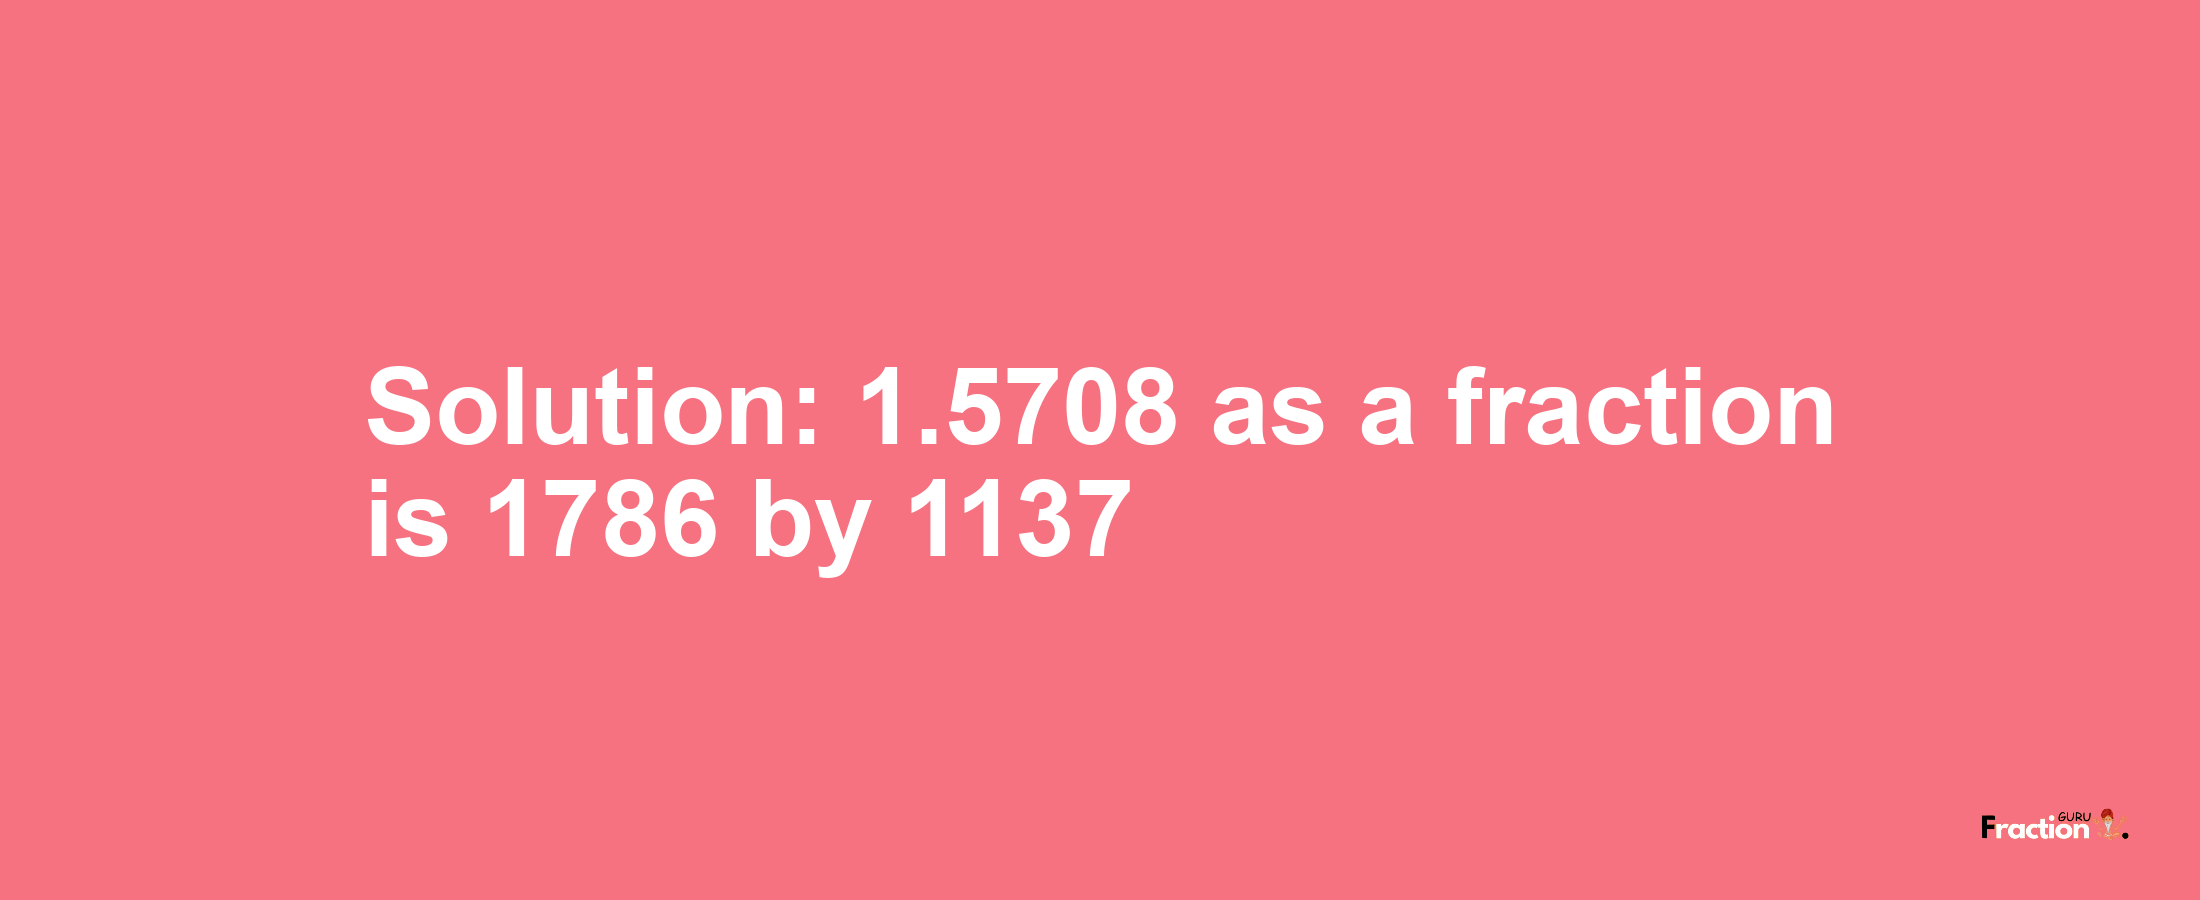 Solution:1.5708 as a fraction is 1786/1137